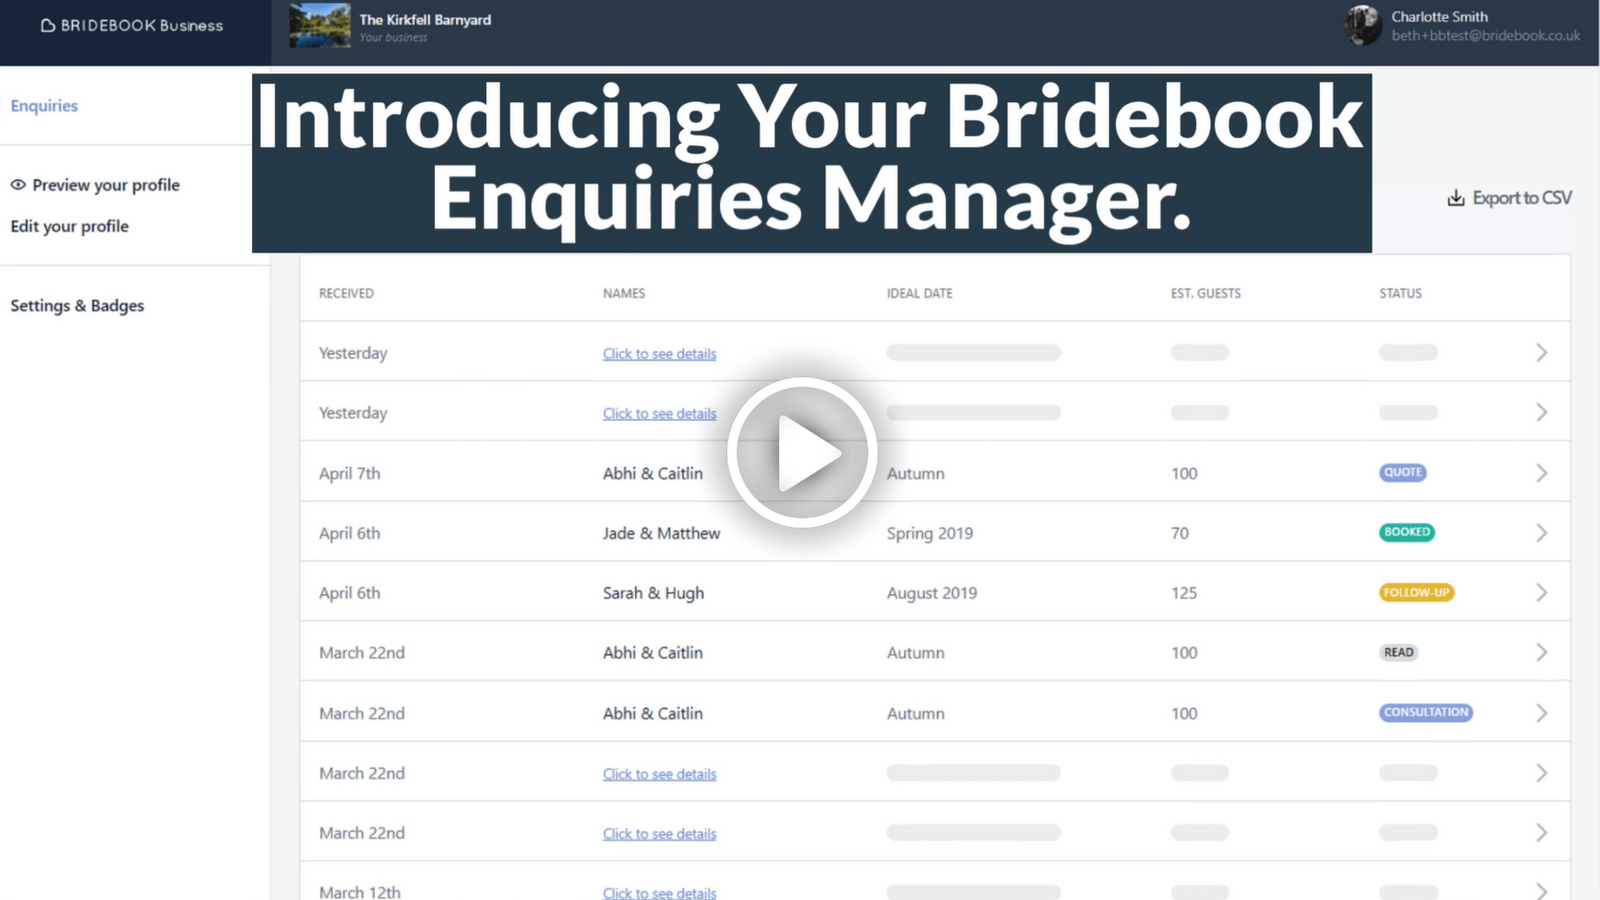 Bridebook.co.uk gives wedding industry professionals the tools they need to market and grow their wedding businesses